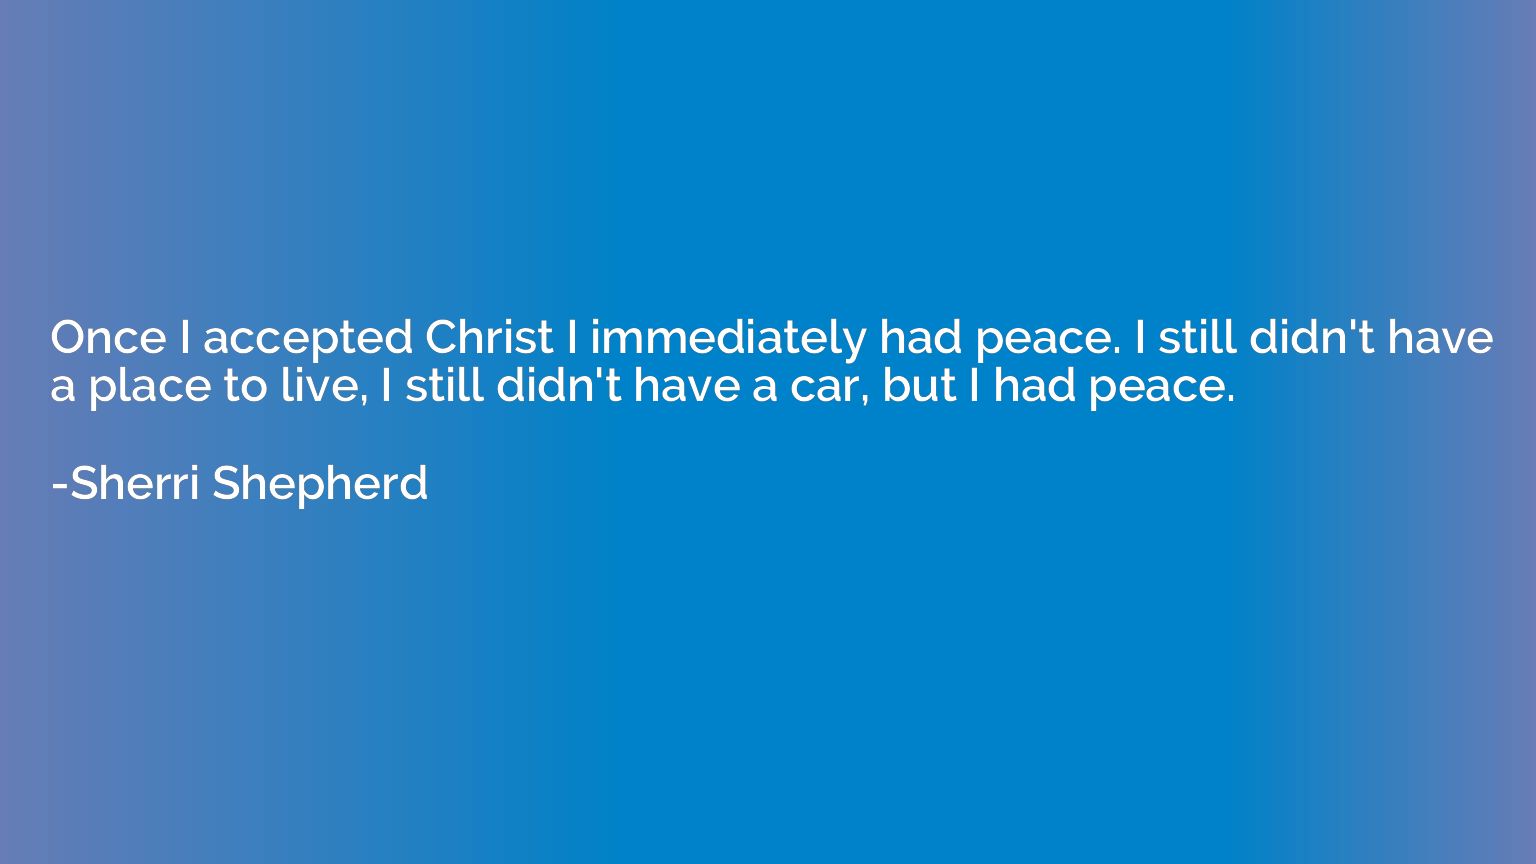 Once I accepted Christ I immediately had peace. I still didn